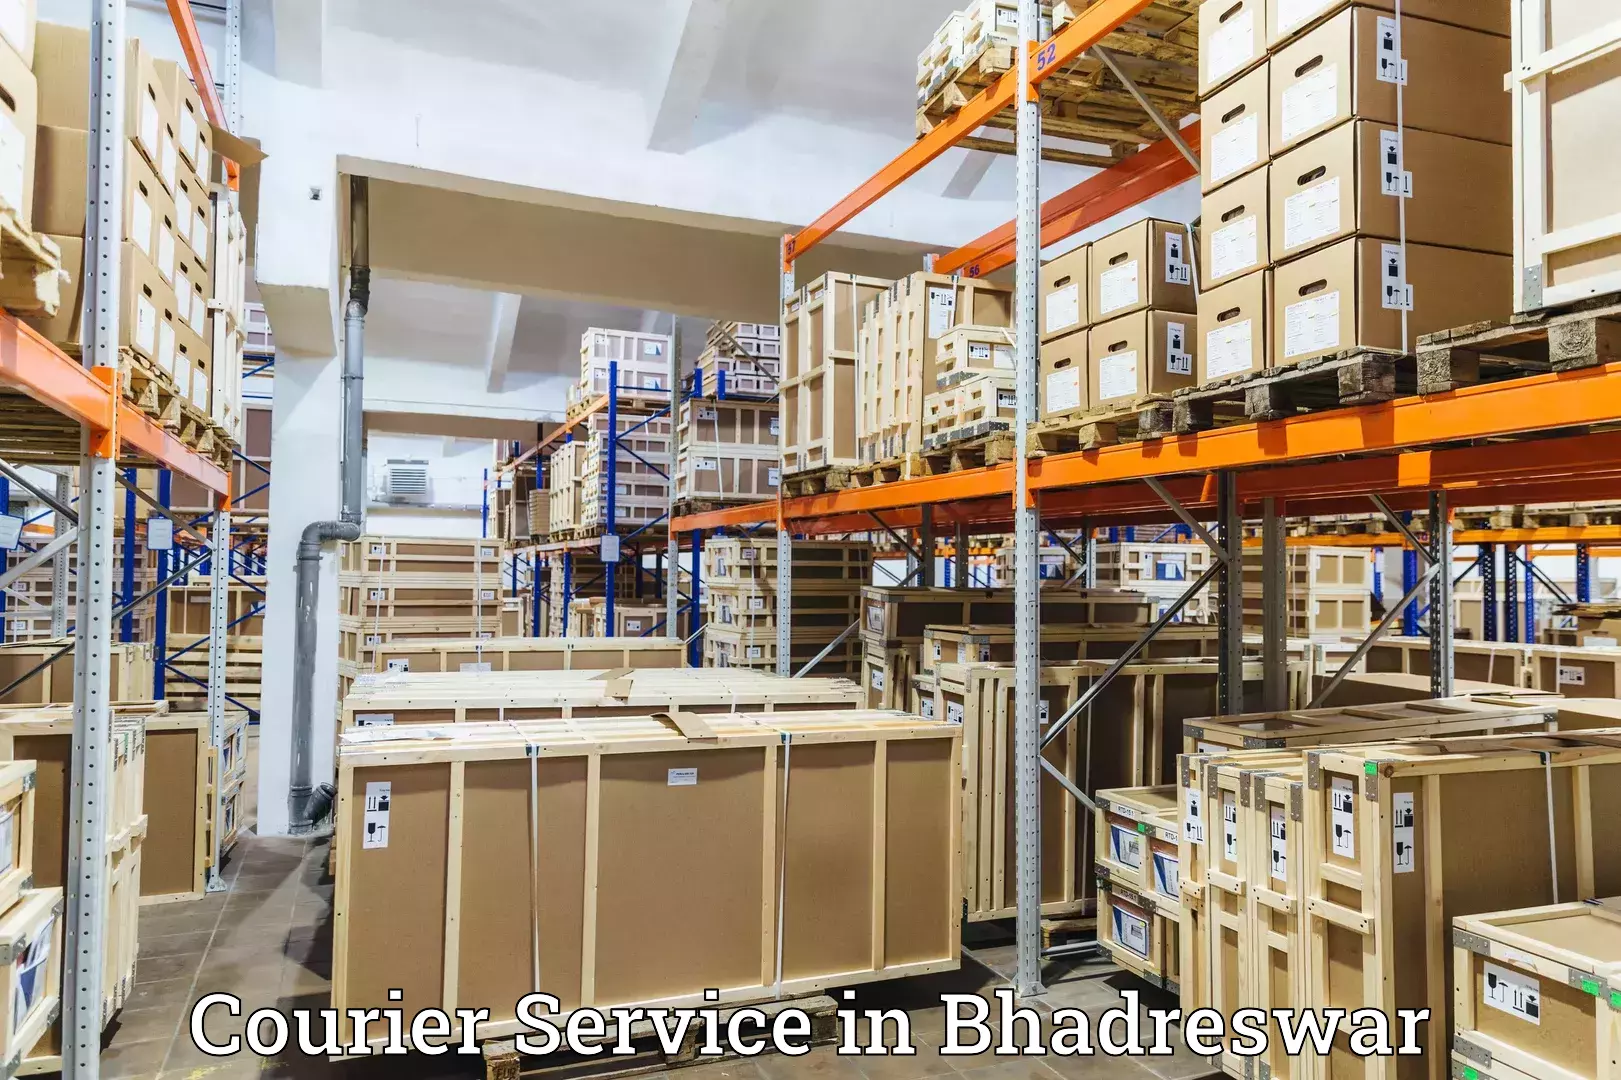 Smart shipping technology in Bhadreswar